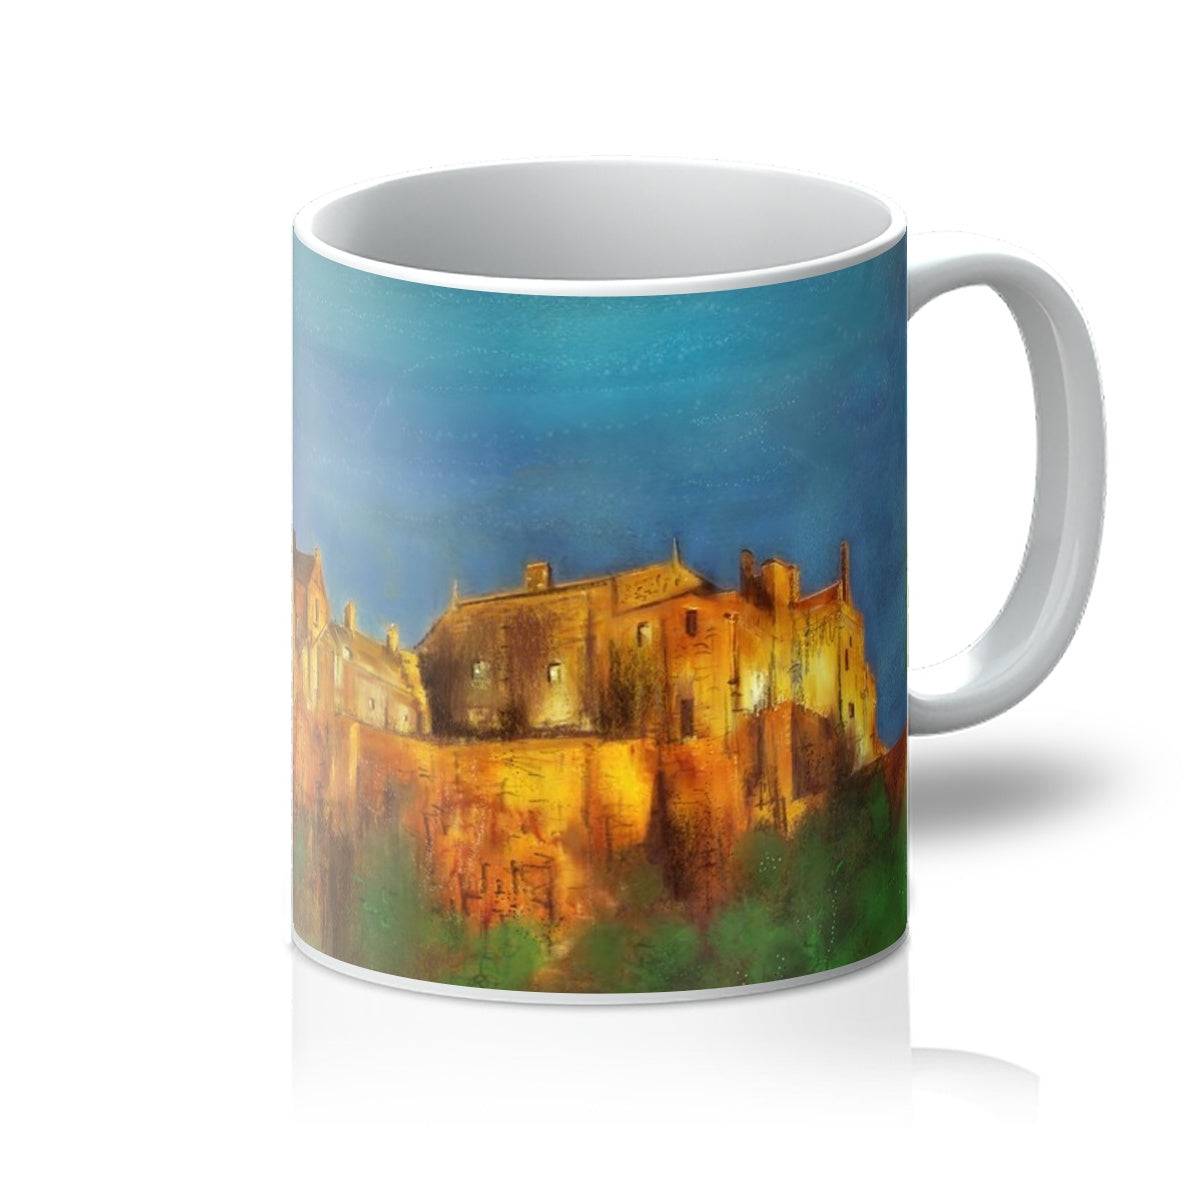 Stirling Castle Art Gifts Mug-Mugs-Historic & Iconic Scotland Art Gallery-11oz-White-Paintings, Prints, Homeware, Art Gifts From Scotland By Scottish Artist Kevin Hunter